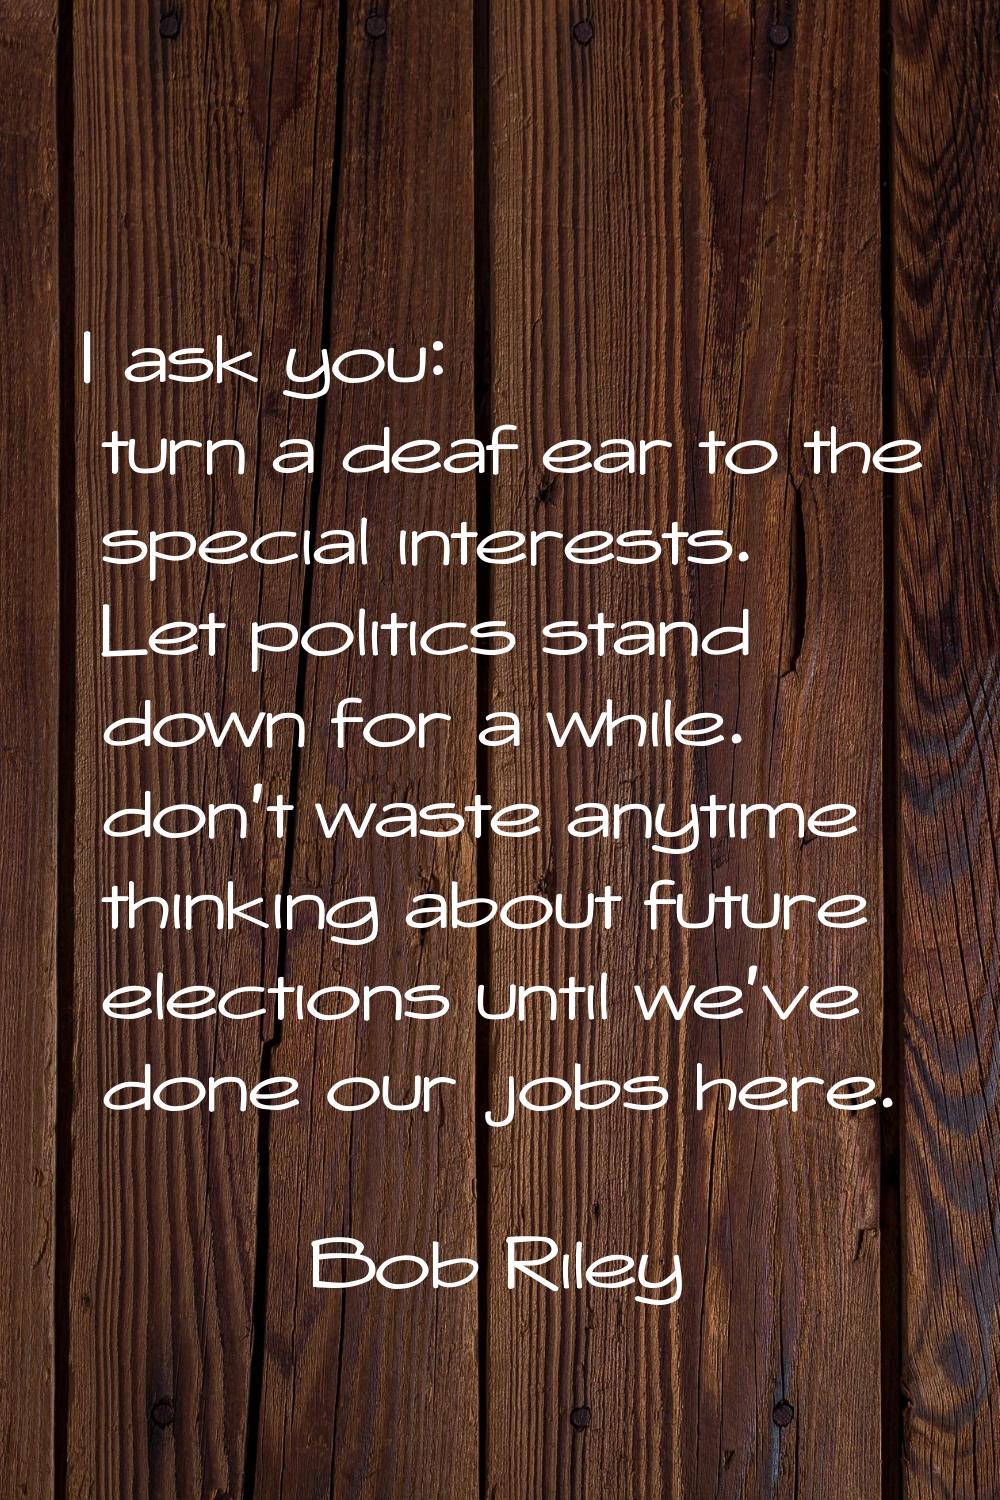 I ask you: turn a deaf ear to the special interests. Let politics stand down for a while. don't was